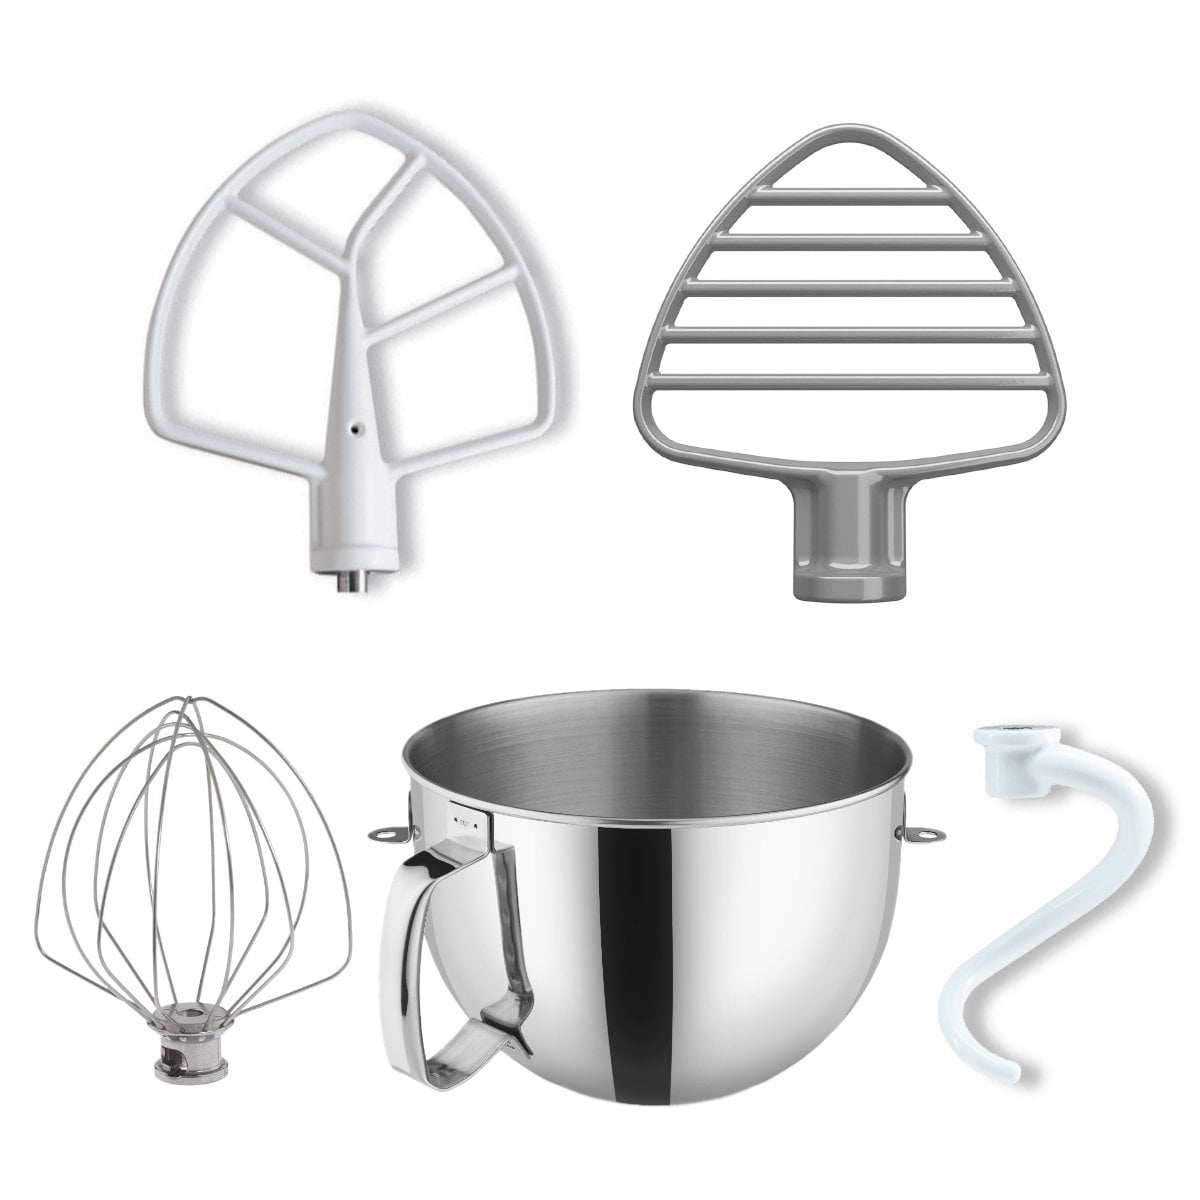 PADDLE ATTACHMENT FOR LARGE BOWL-LIFT MIXERS - STAINLESS STEEL